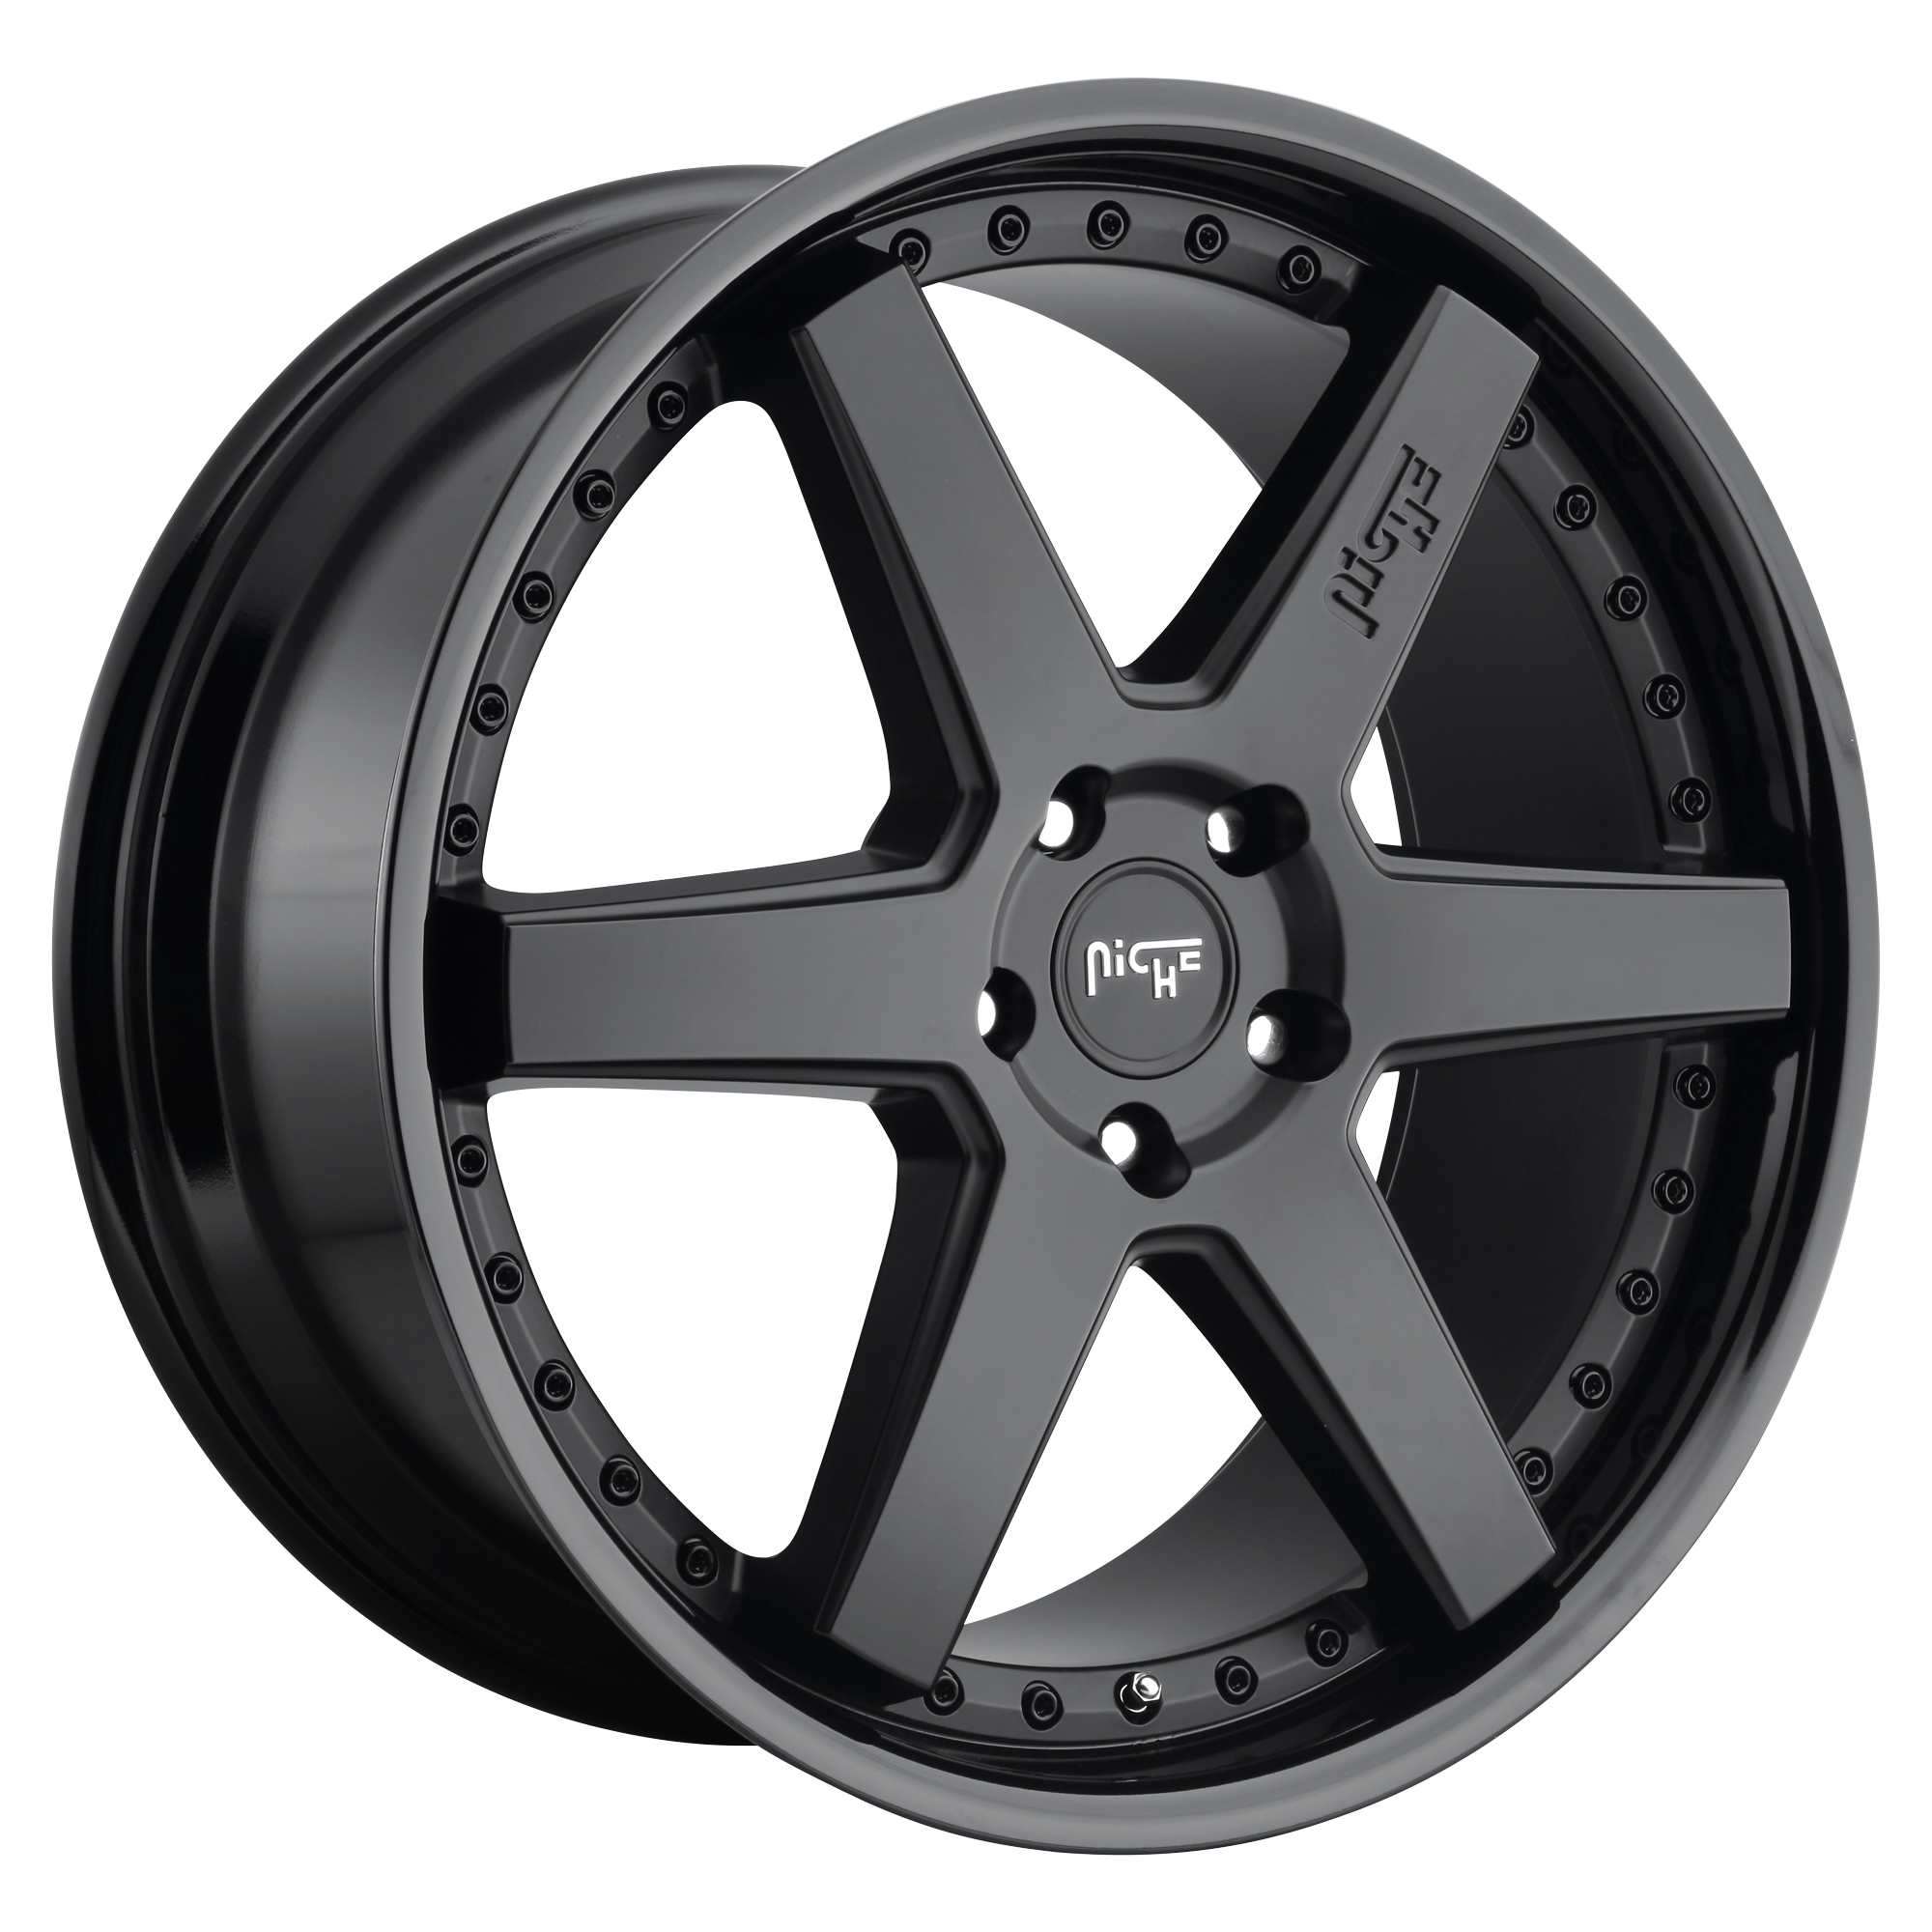 ALTAIR 18x8.5 5x114.30 GLOSS BLACK MATTE BLACK (35 mm) - Tires and Engine Performance